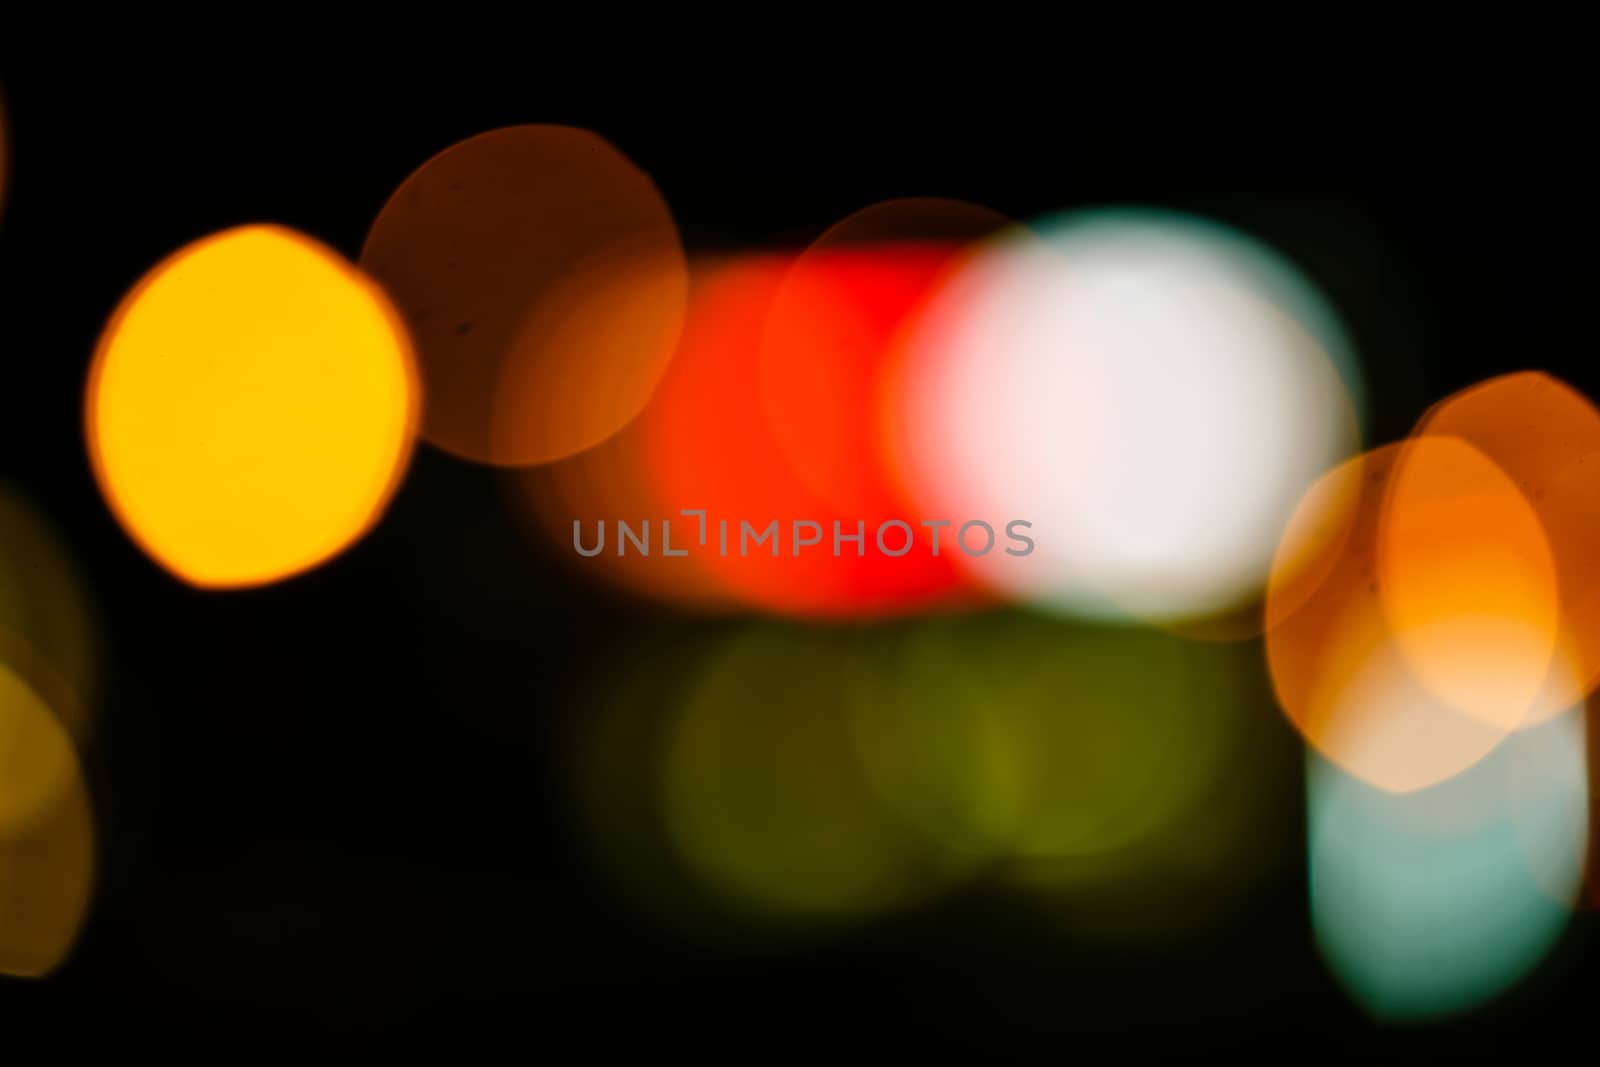 Abstract defocused lights of the night city bokeh background